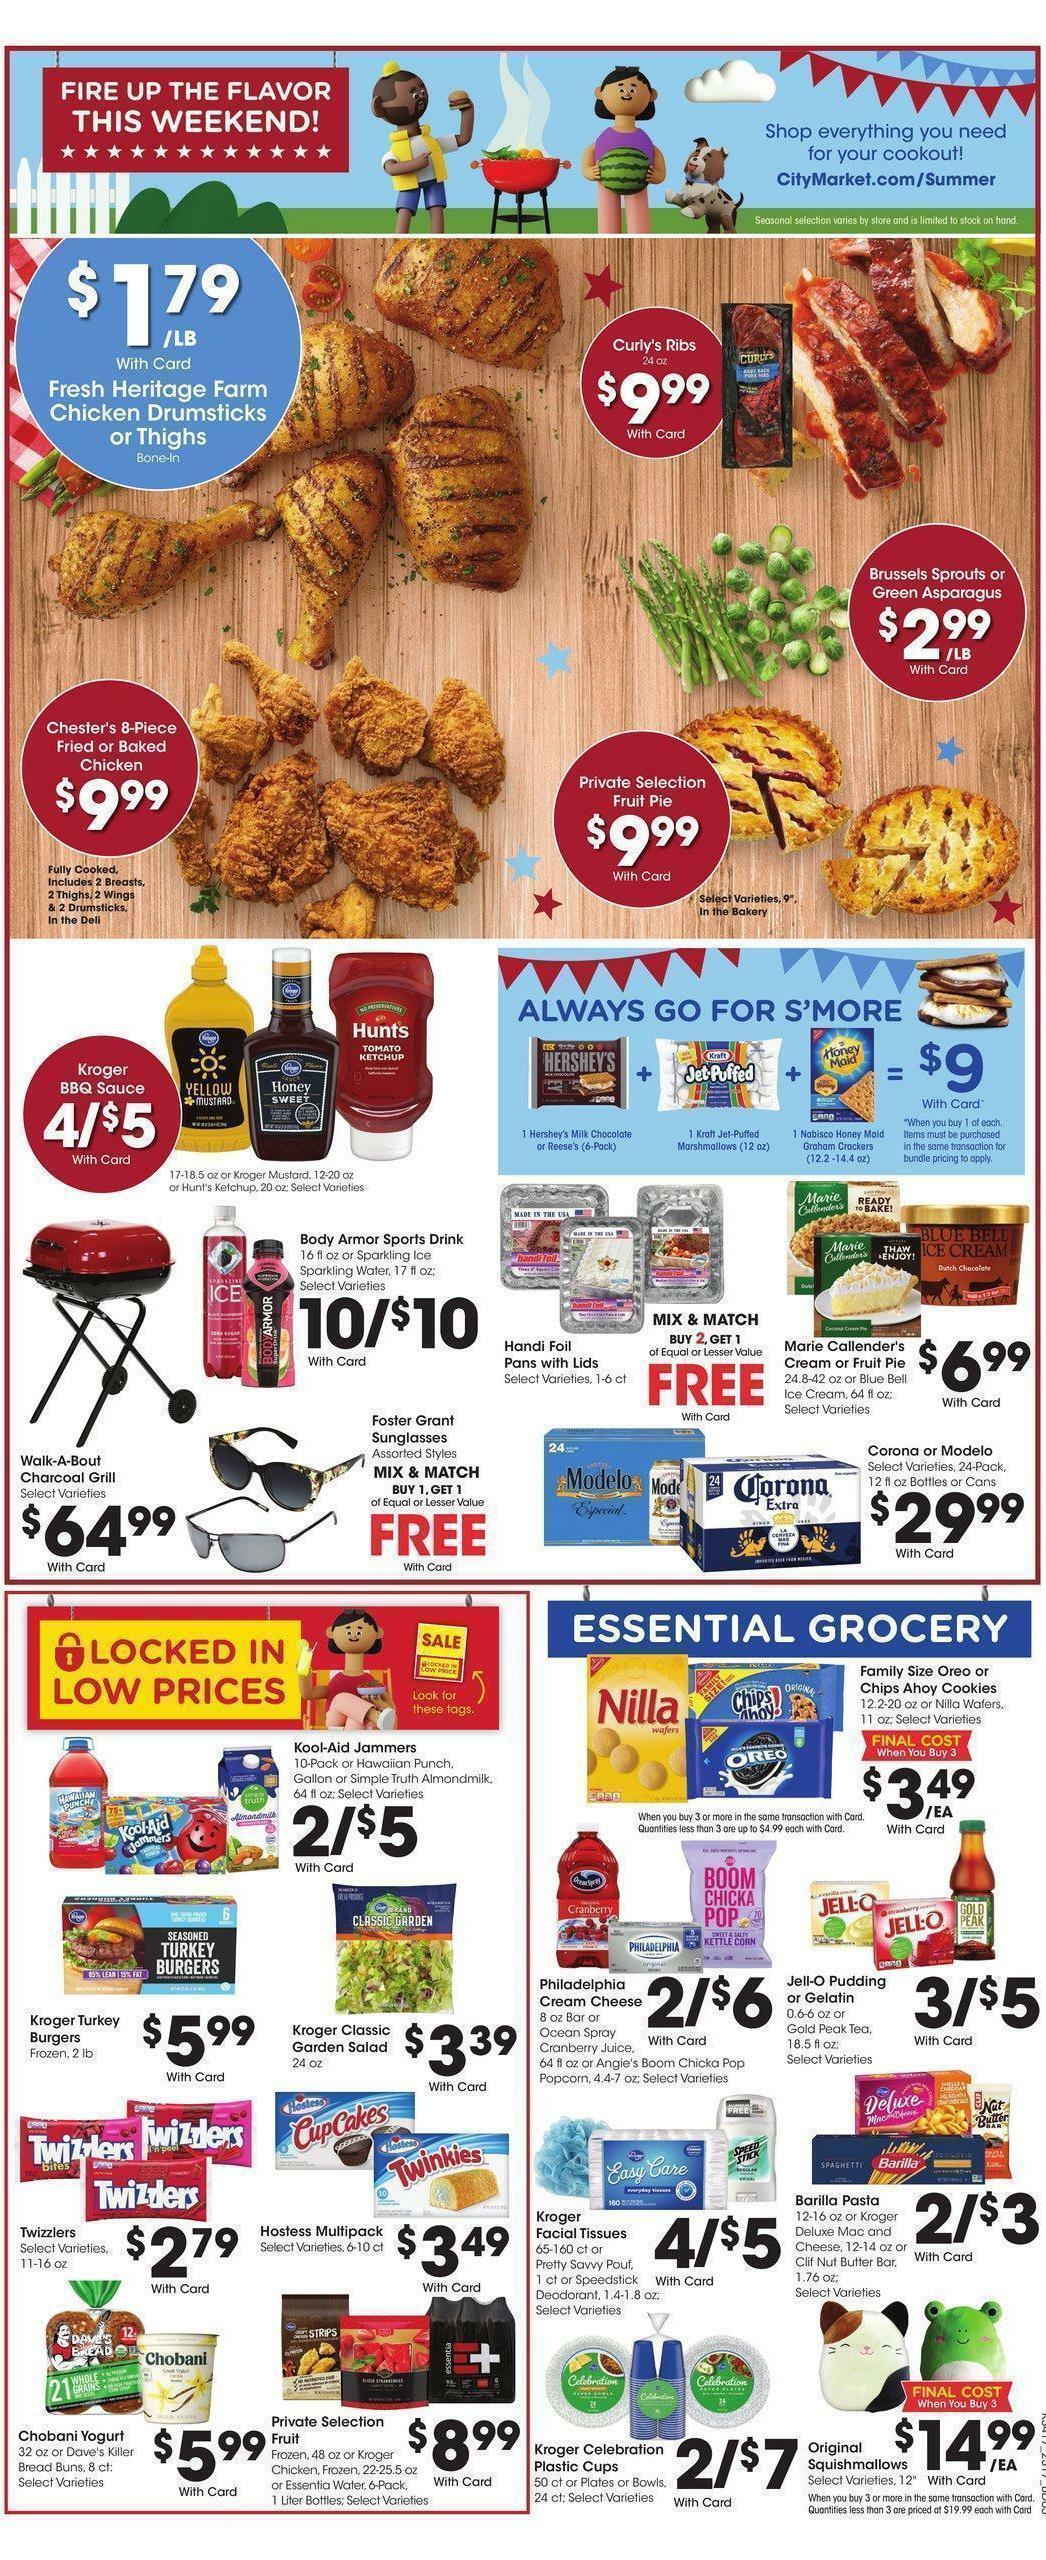 City Market Weekly Ad from May 24